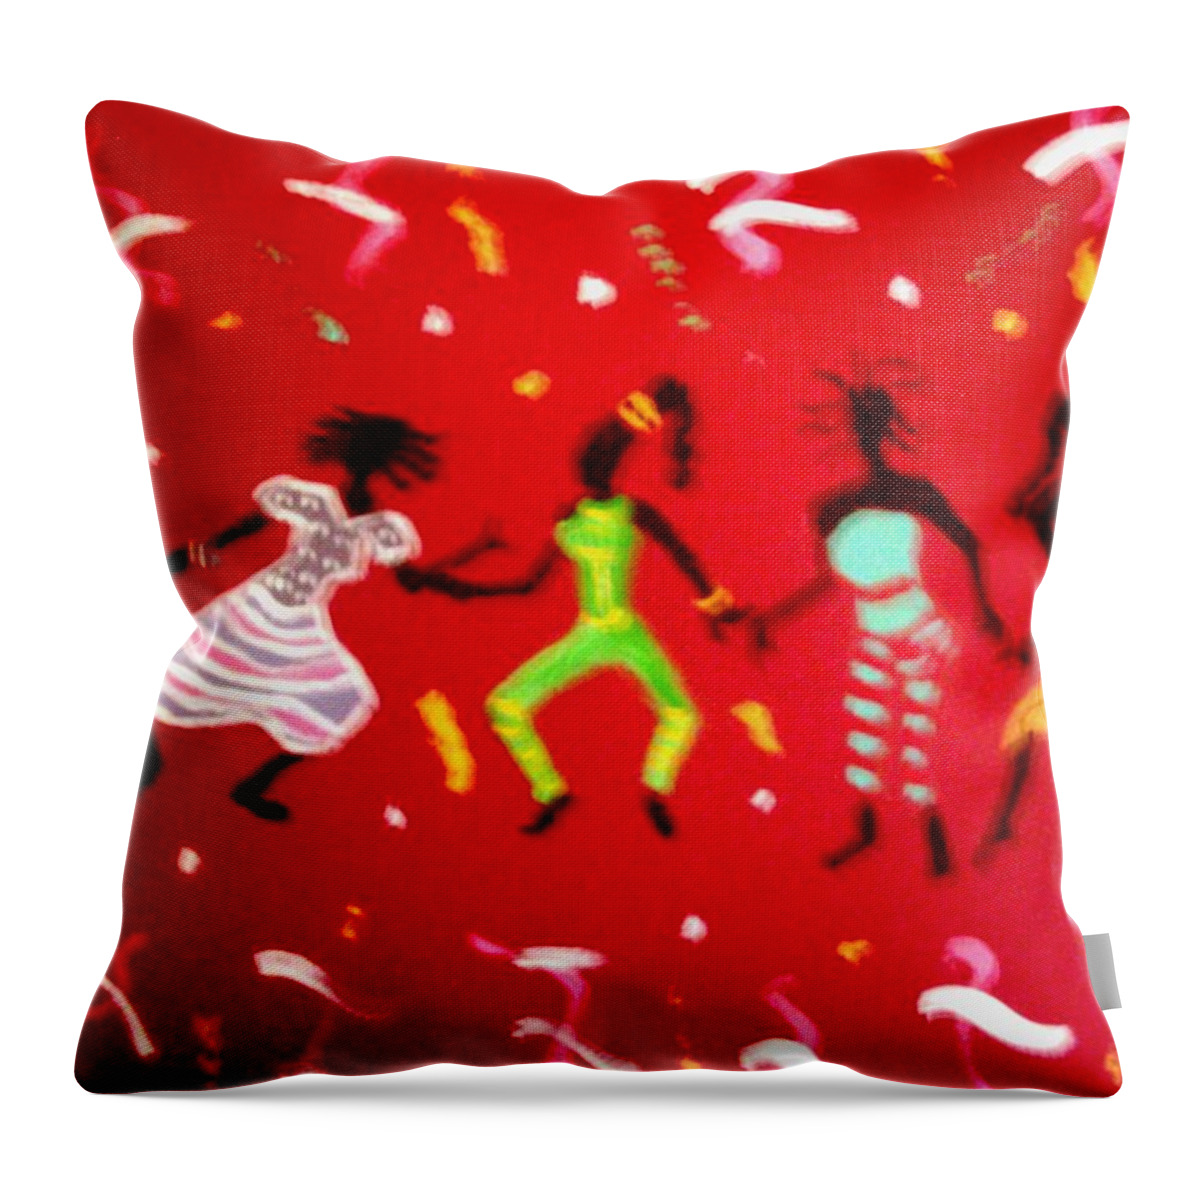 Figures Throw Pillow featuring the painting El Carnaval2 by Lorna Lorraine